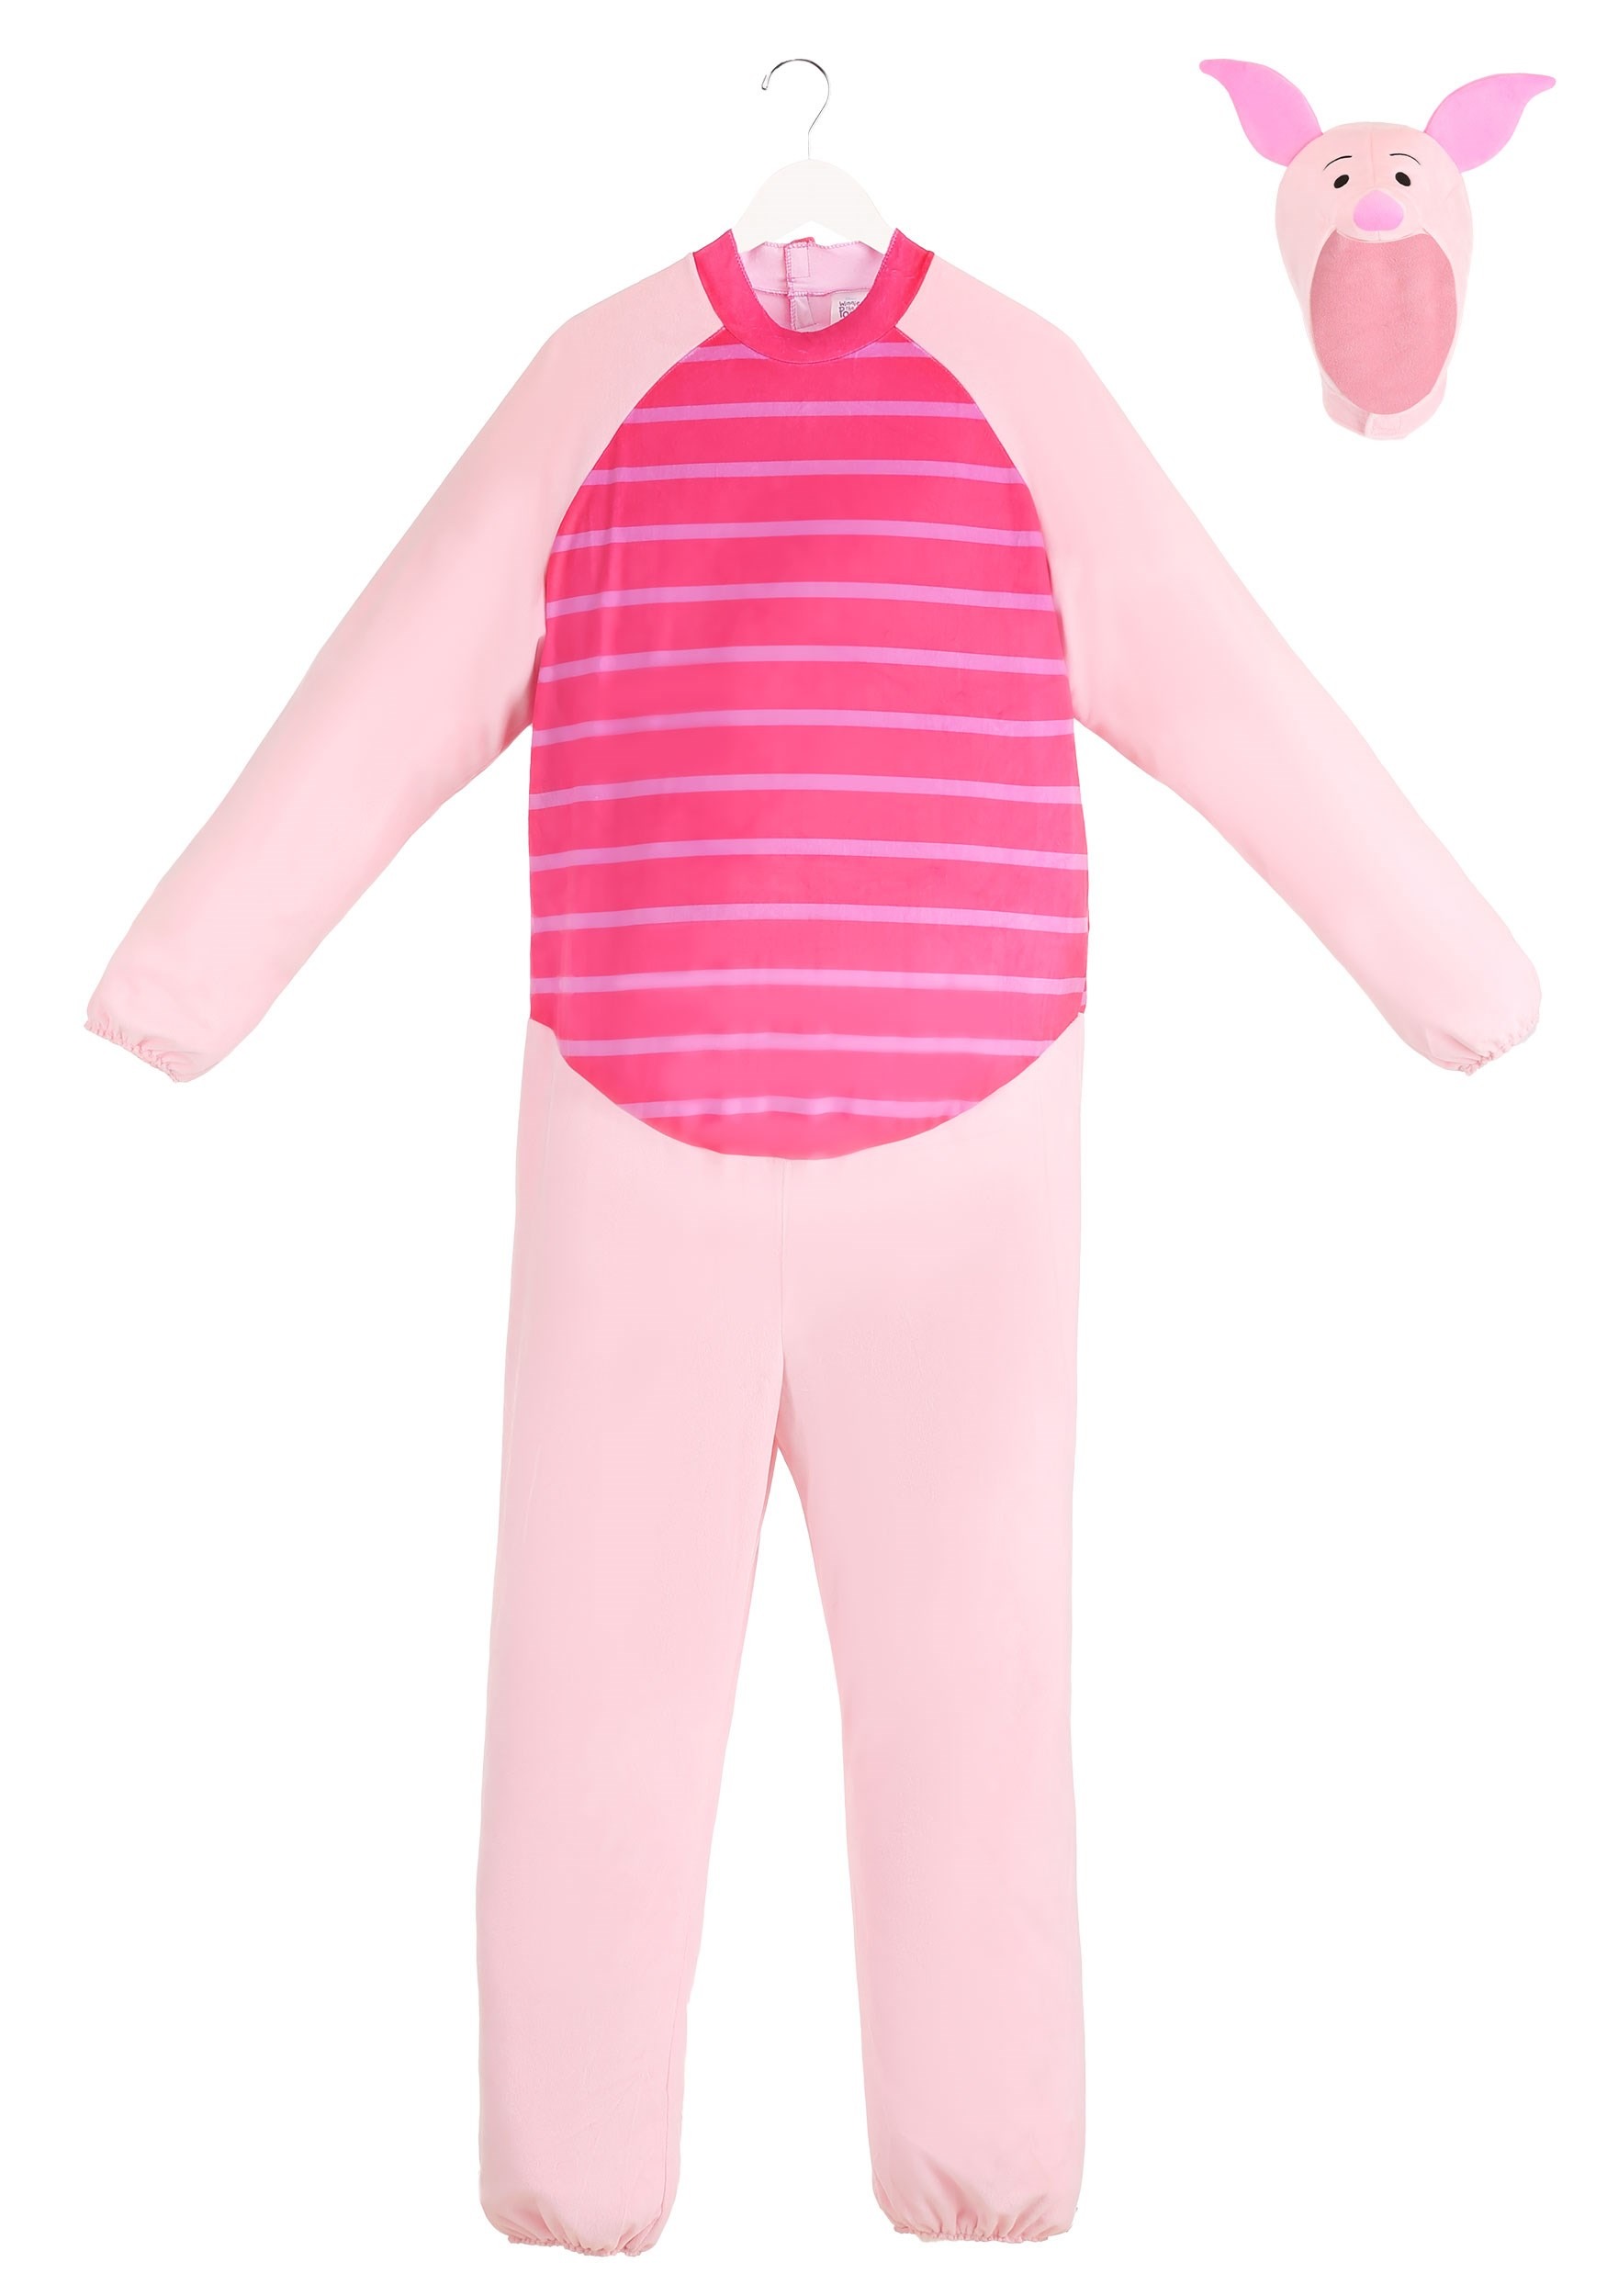 Winnie The Pooh Piglet Deluxe Fancy Dress Costume For Adults